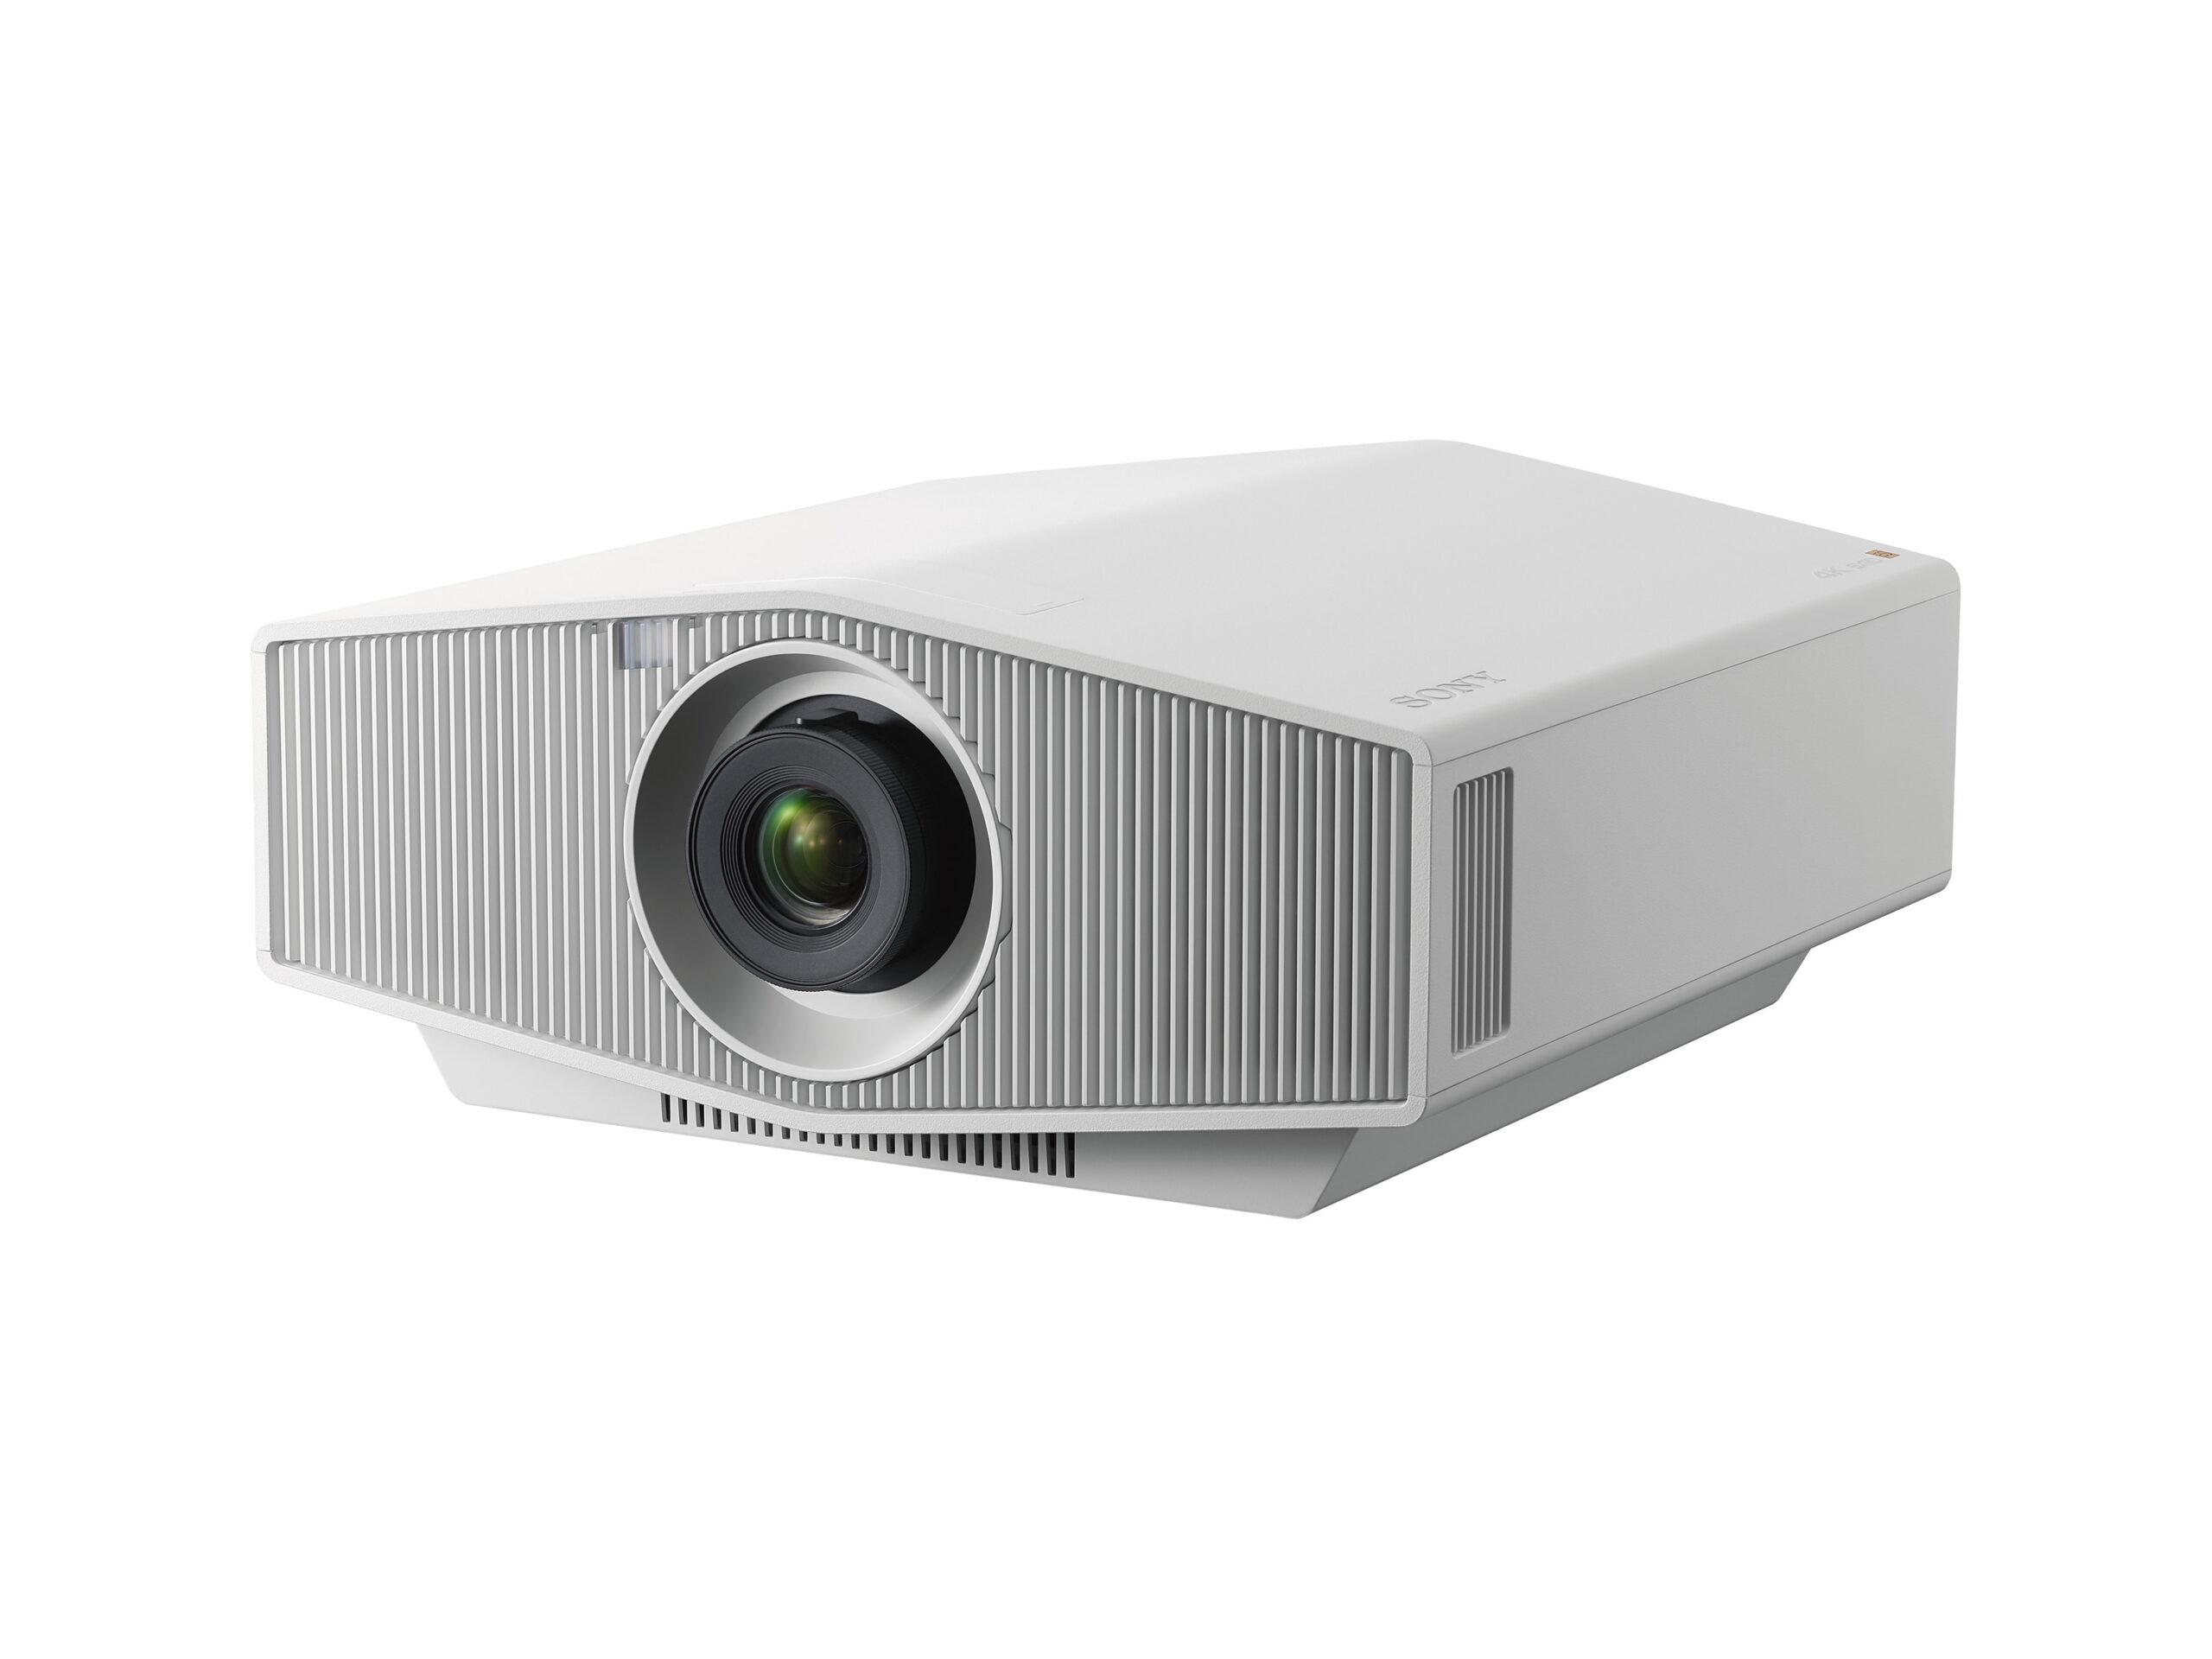 This is no mere annual refresh. Sony's three new home theater projectors are a generational leap forward. a28a1af8 vplxw5000 3q 220201 08 large scaled